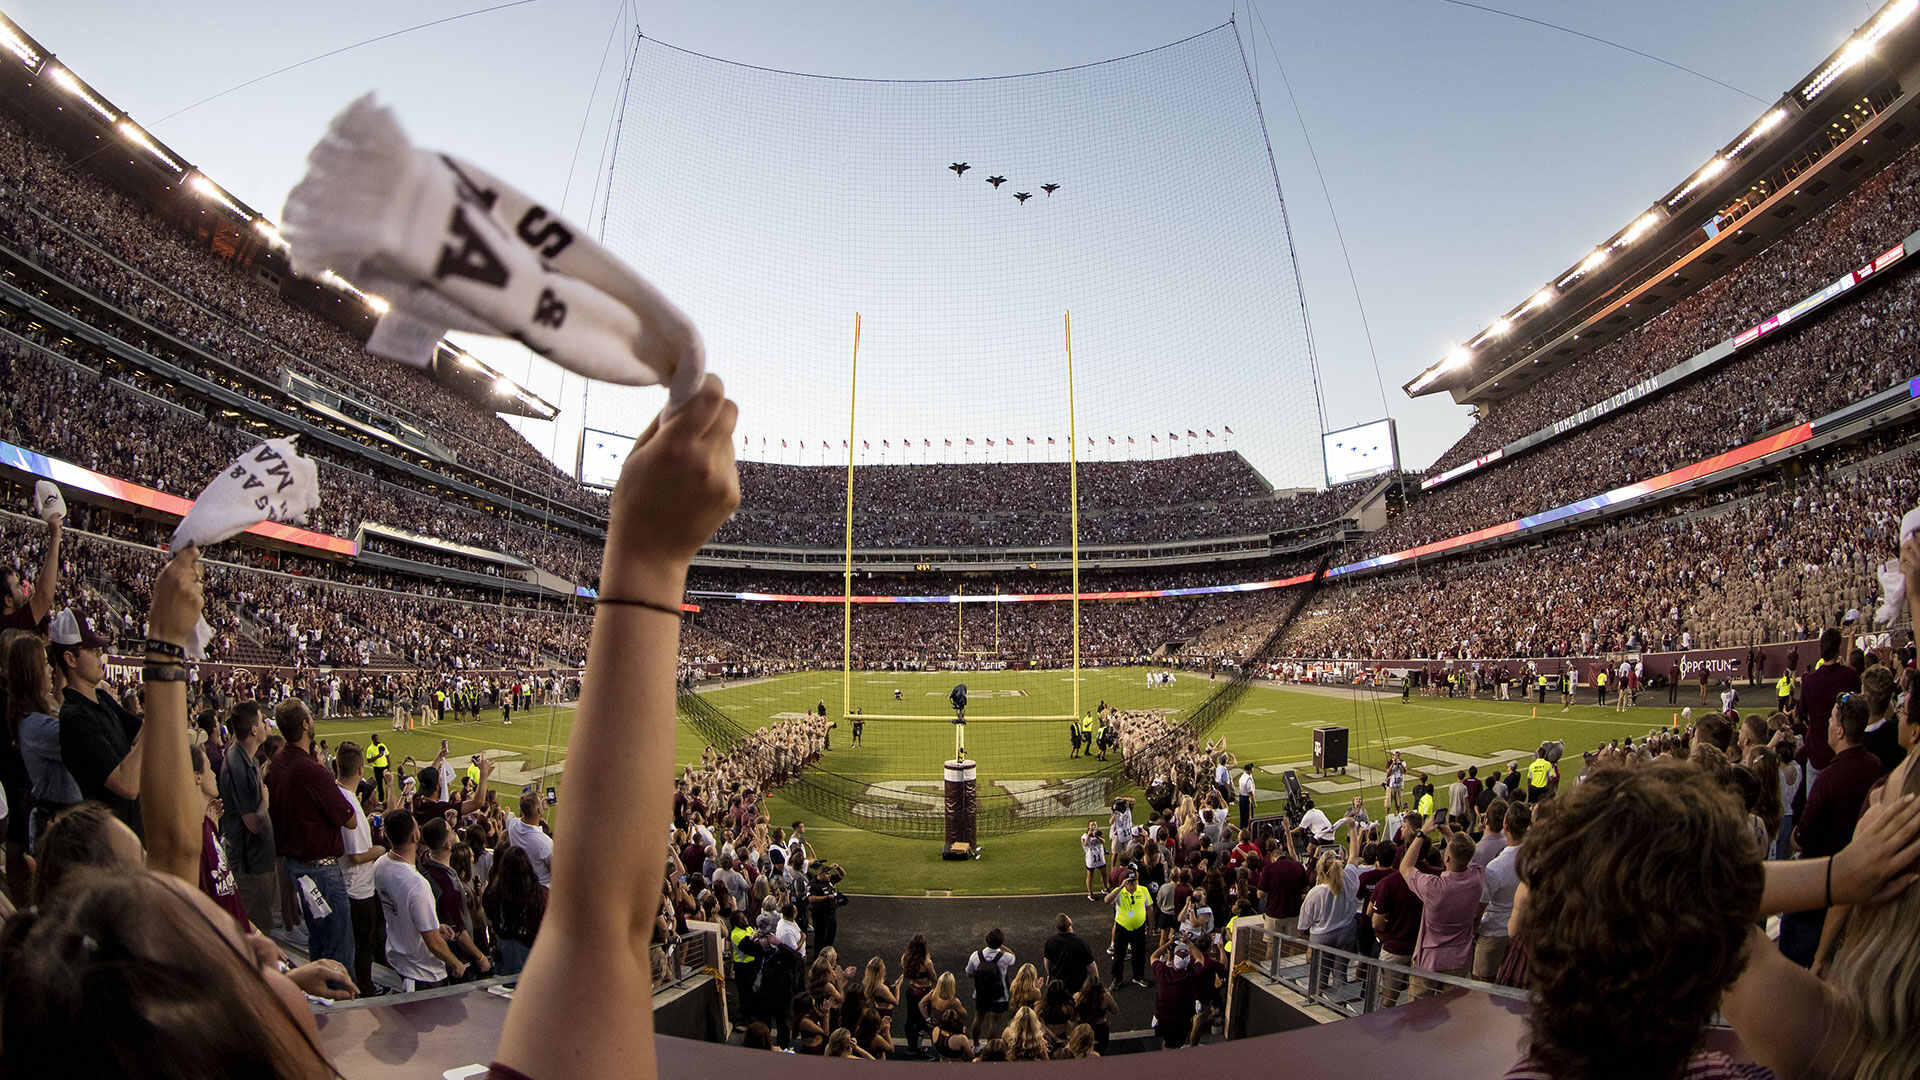 17-astounding-facts-about-kyle-field